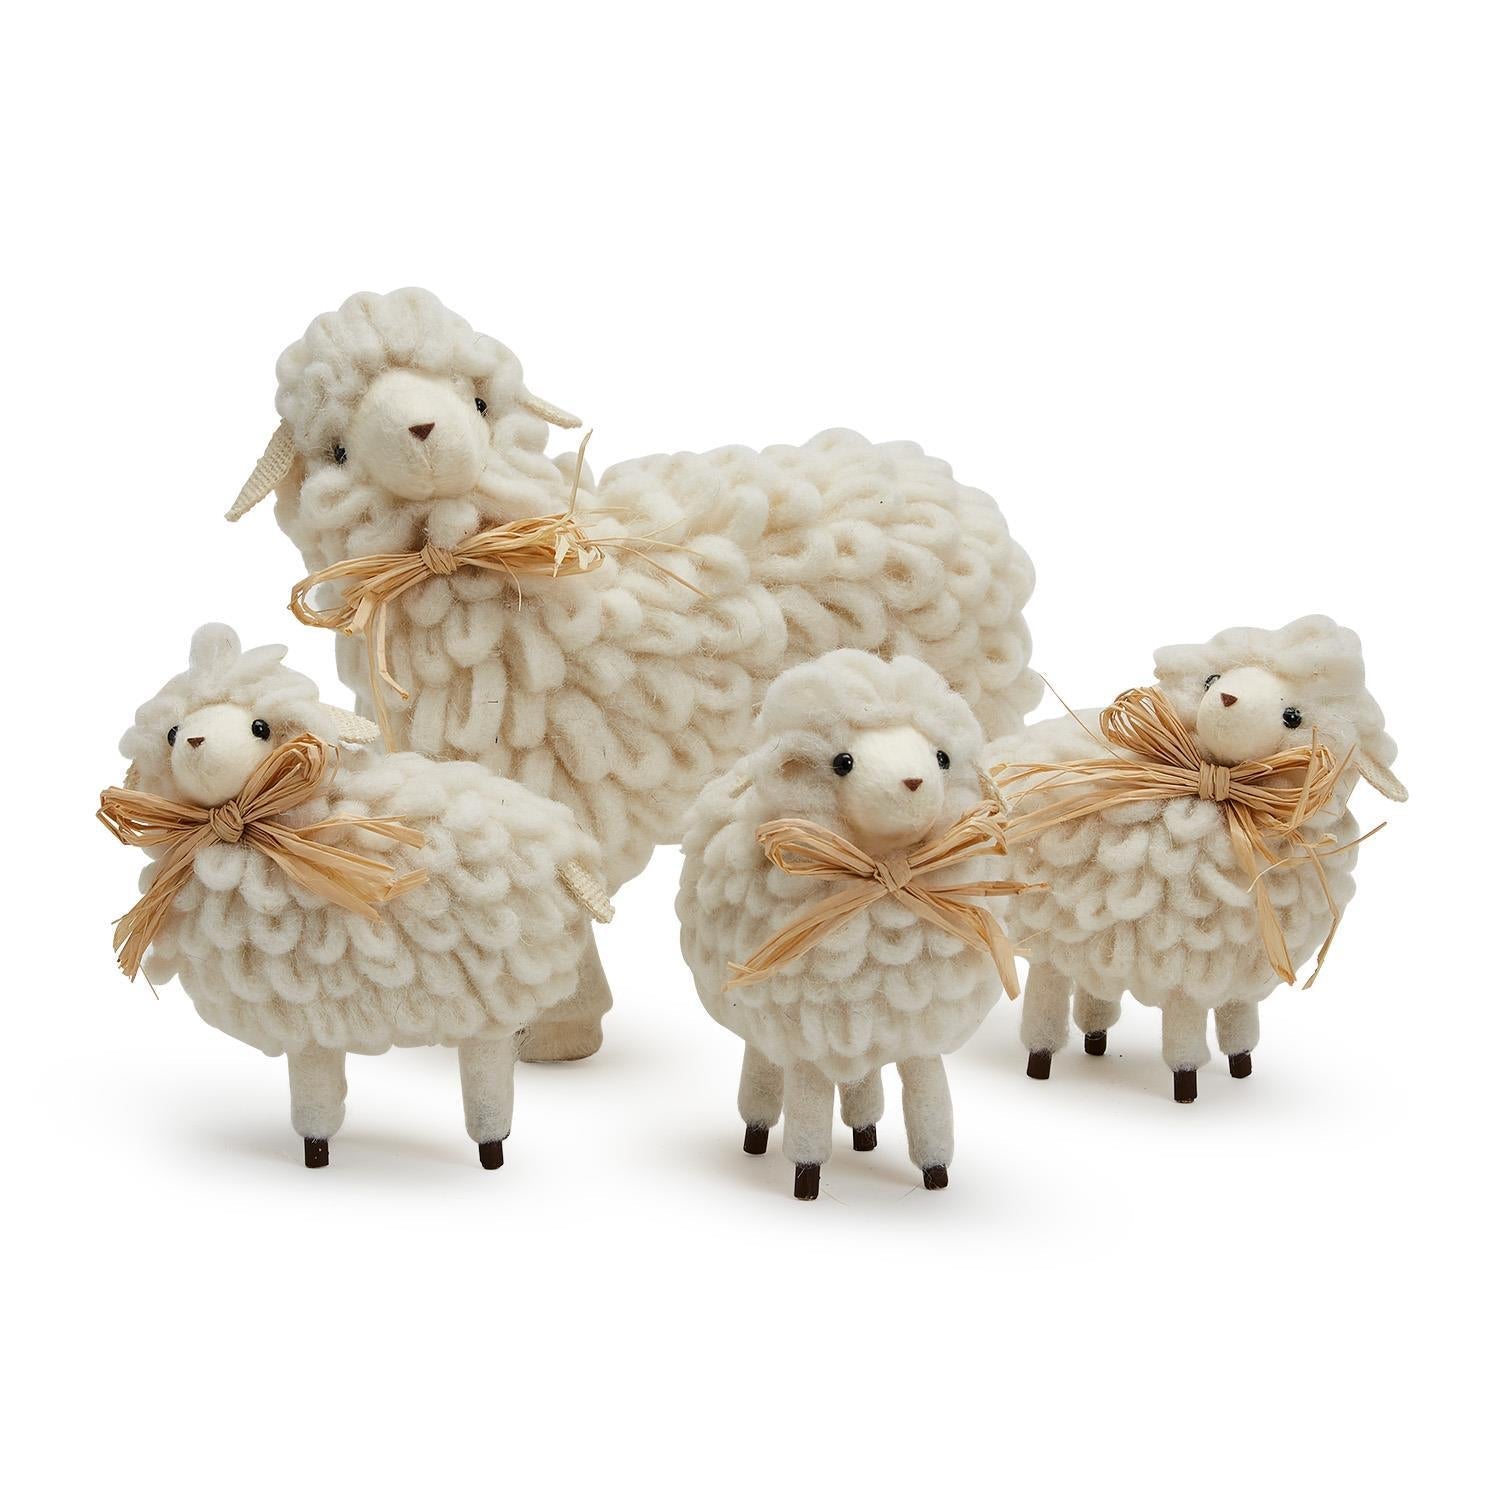 Flock of Sheep S/4 with Raffia Tie